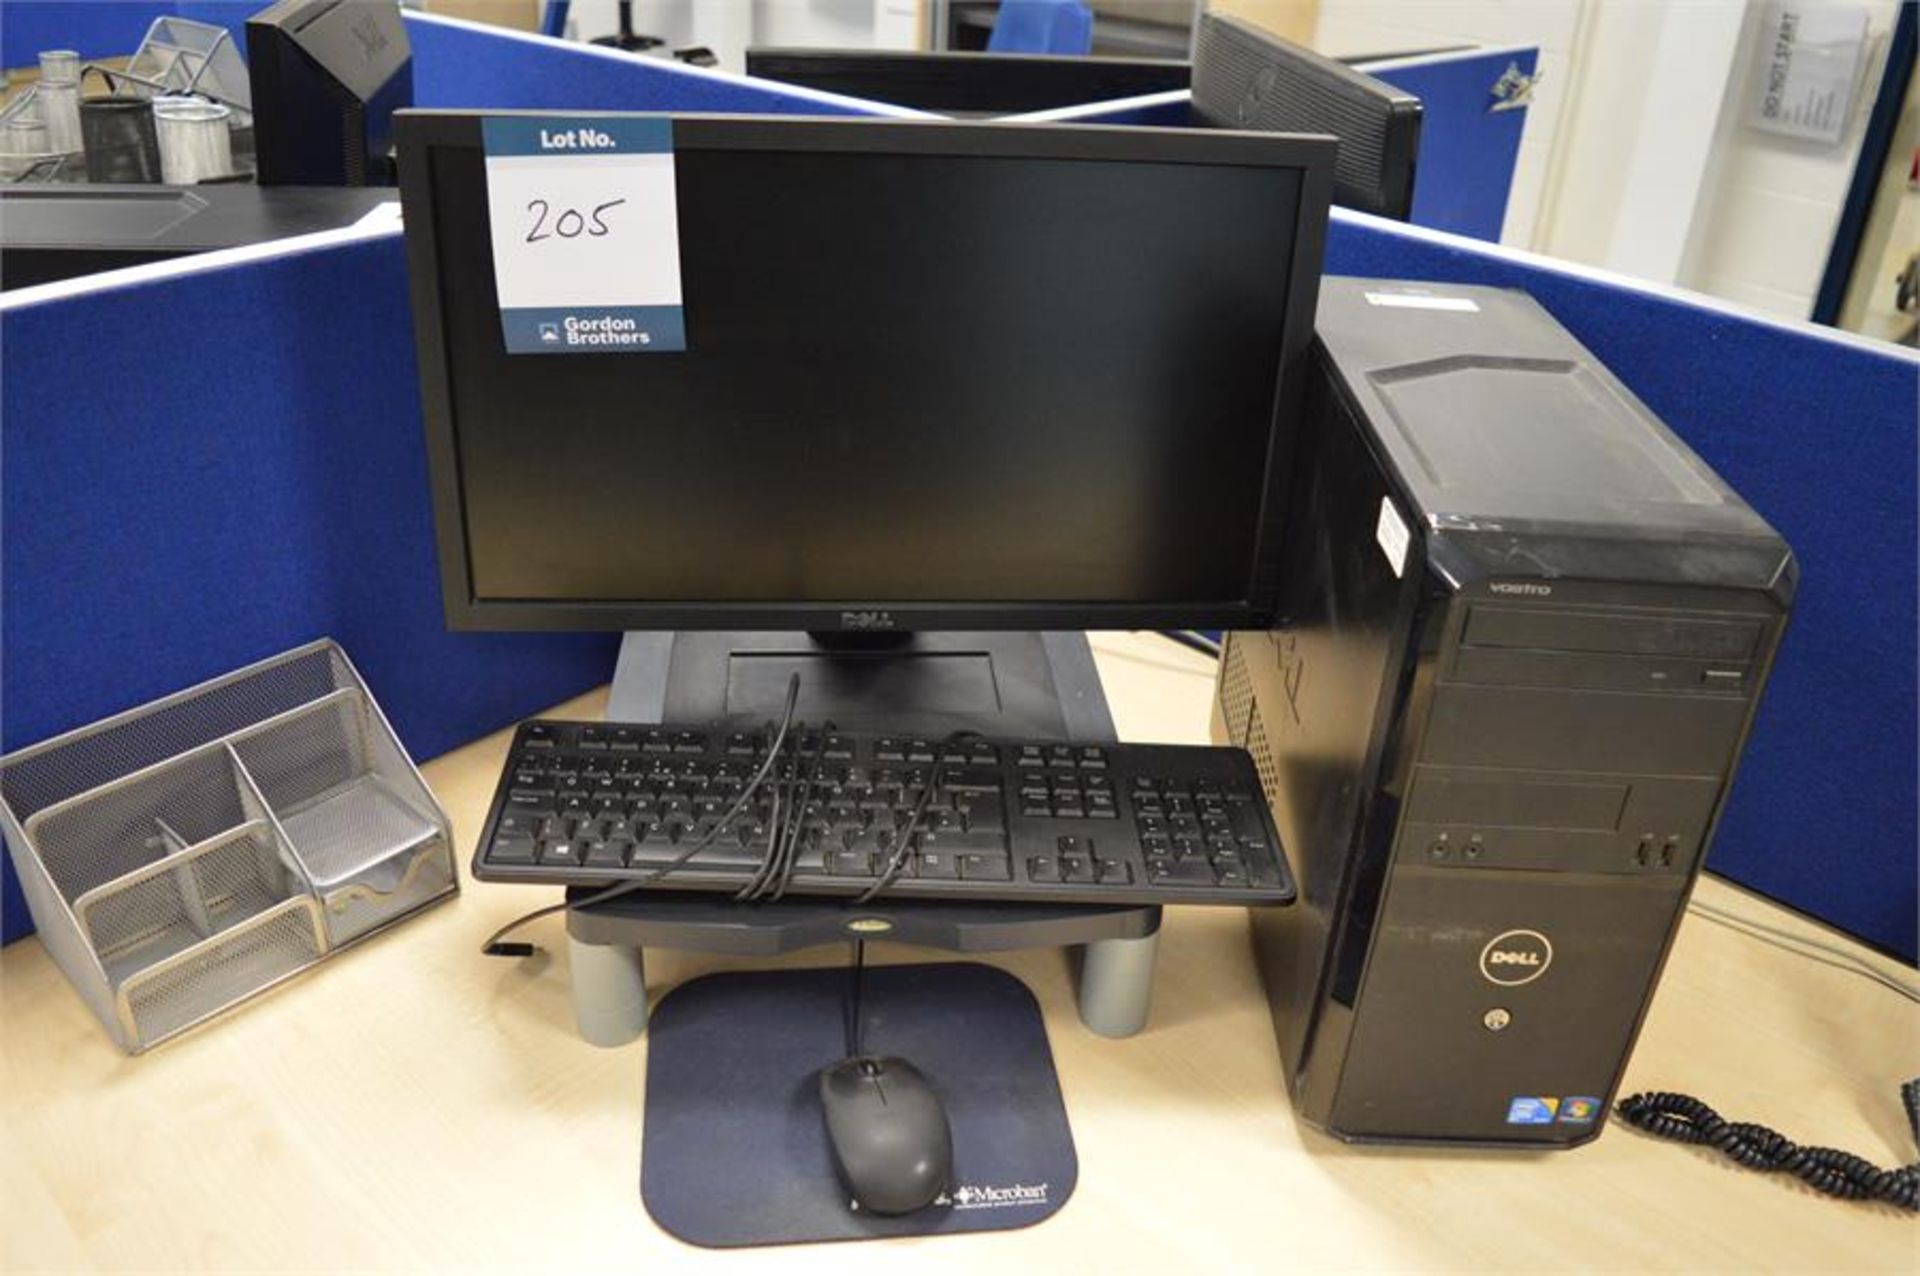 Dell, Vostro Core 2 Duo PC with Dell flat screen monitor, keyboard and mouse